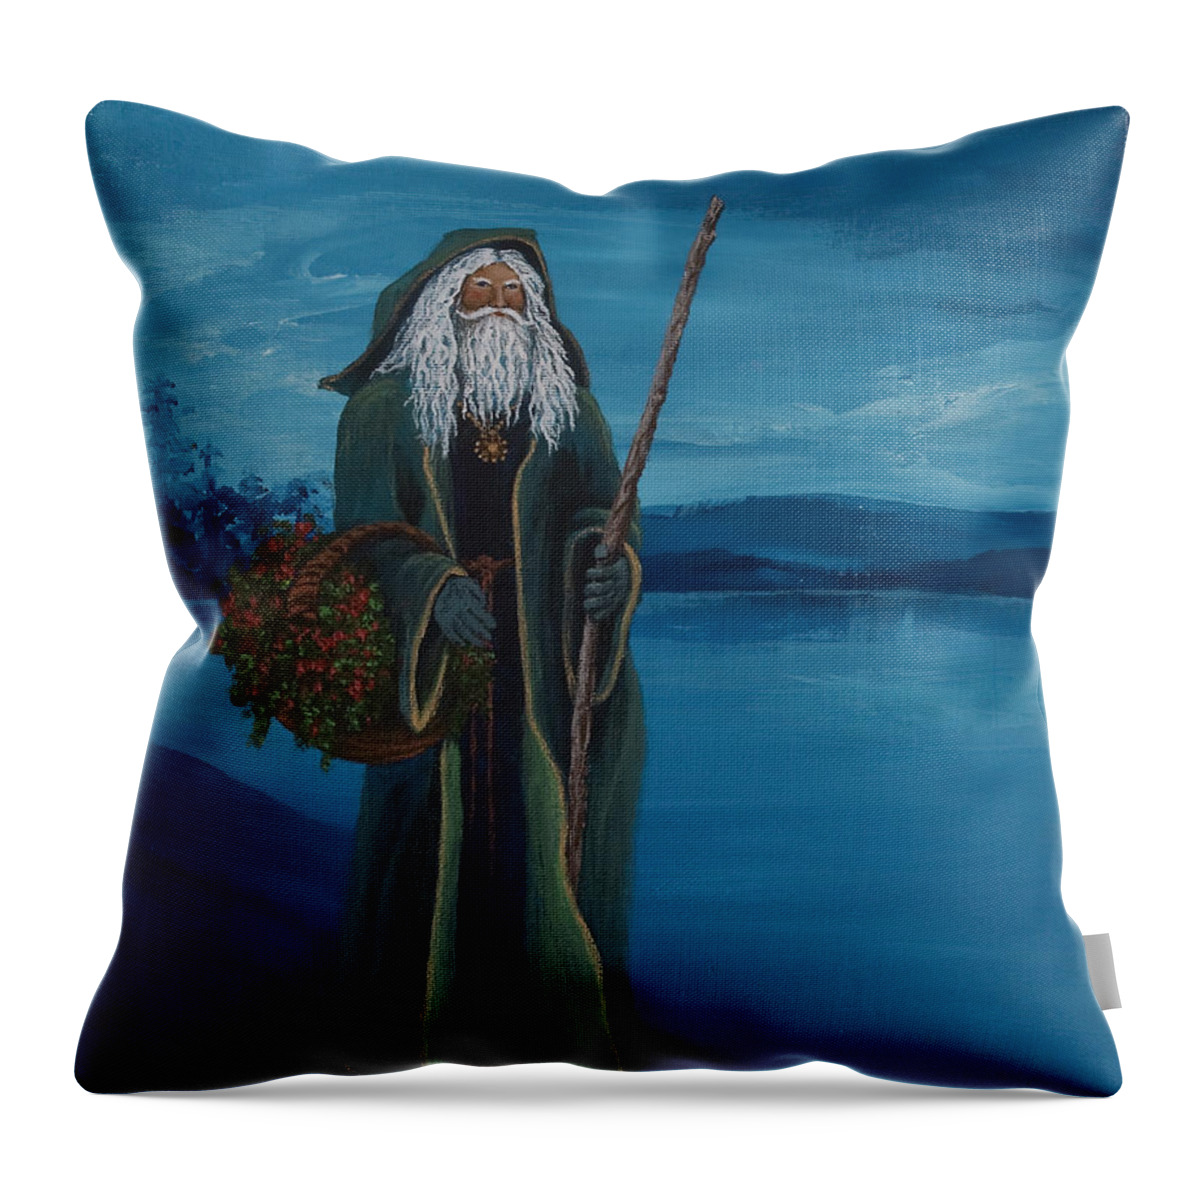 Christmas Throw Pillow featuring the painting Father Christmas by Darice Machel McGuire